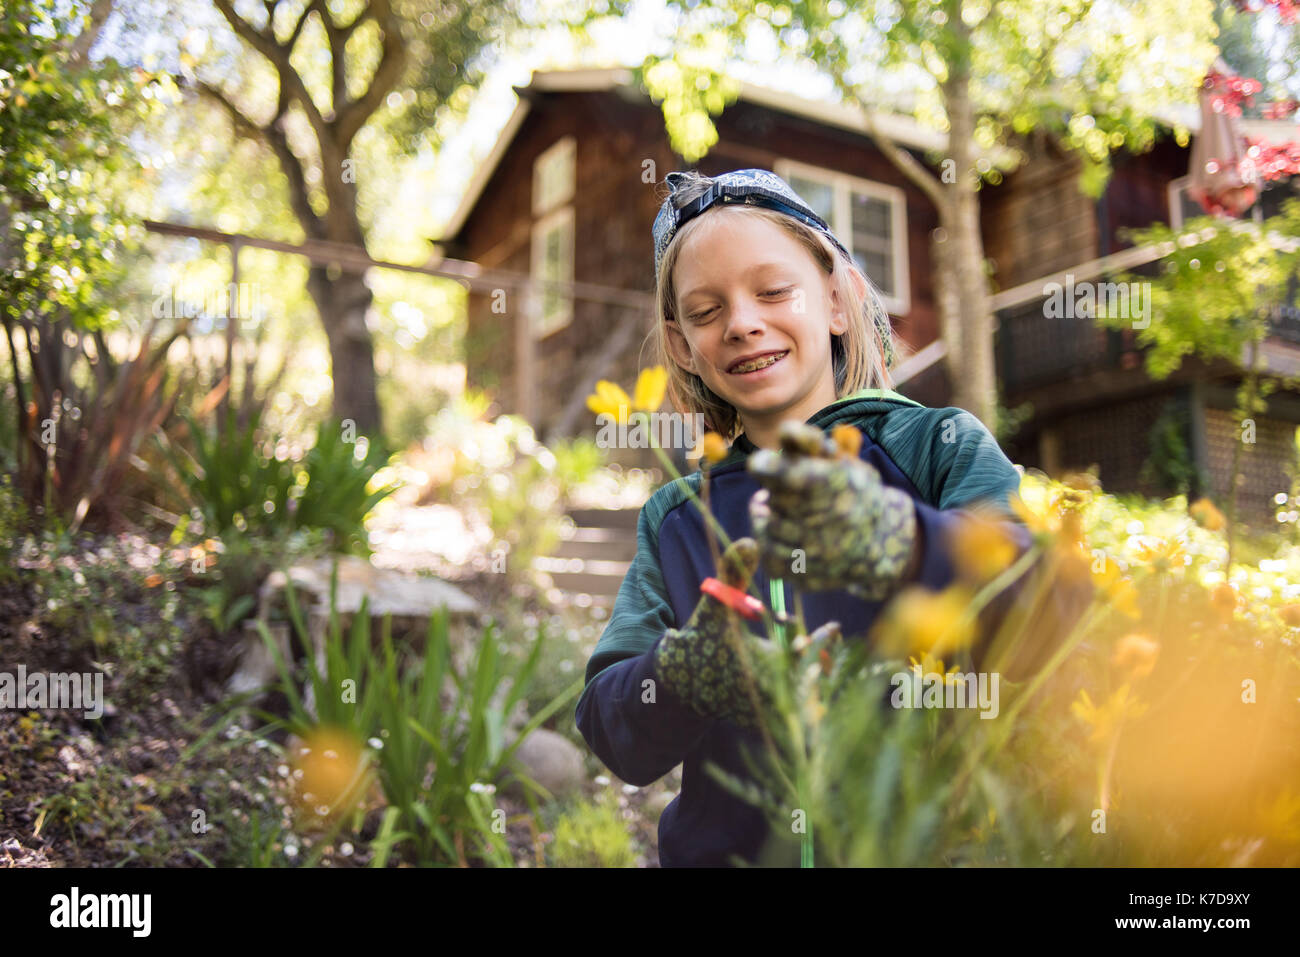 Happy boy cutting flowers while standing in garden Stock Photo